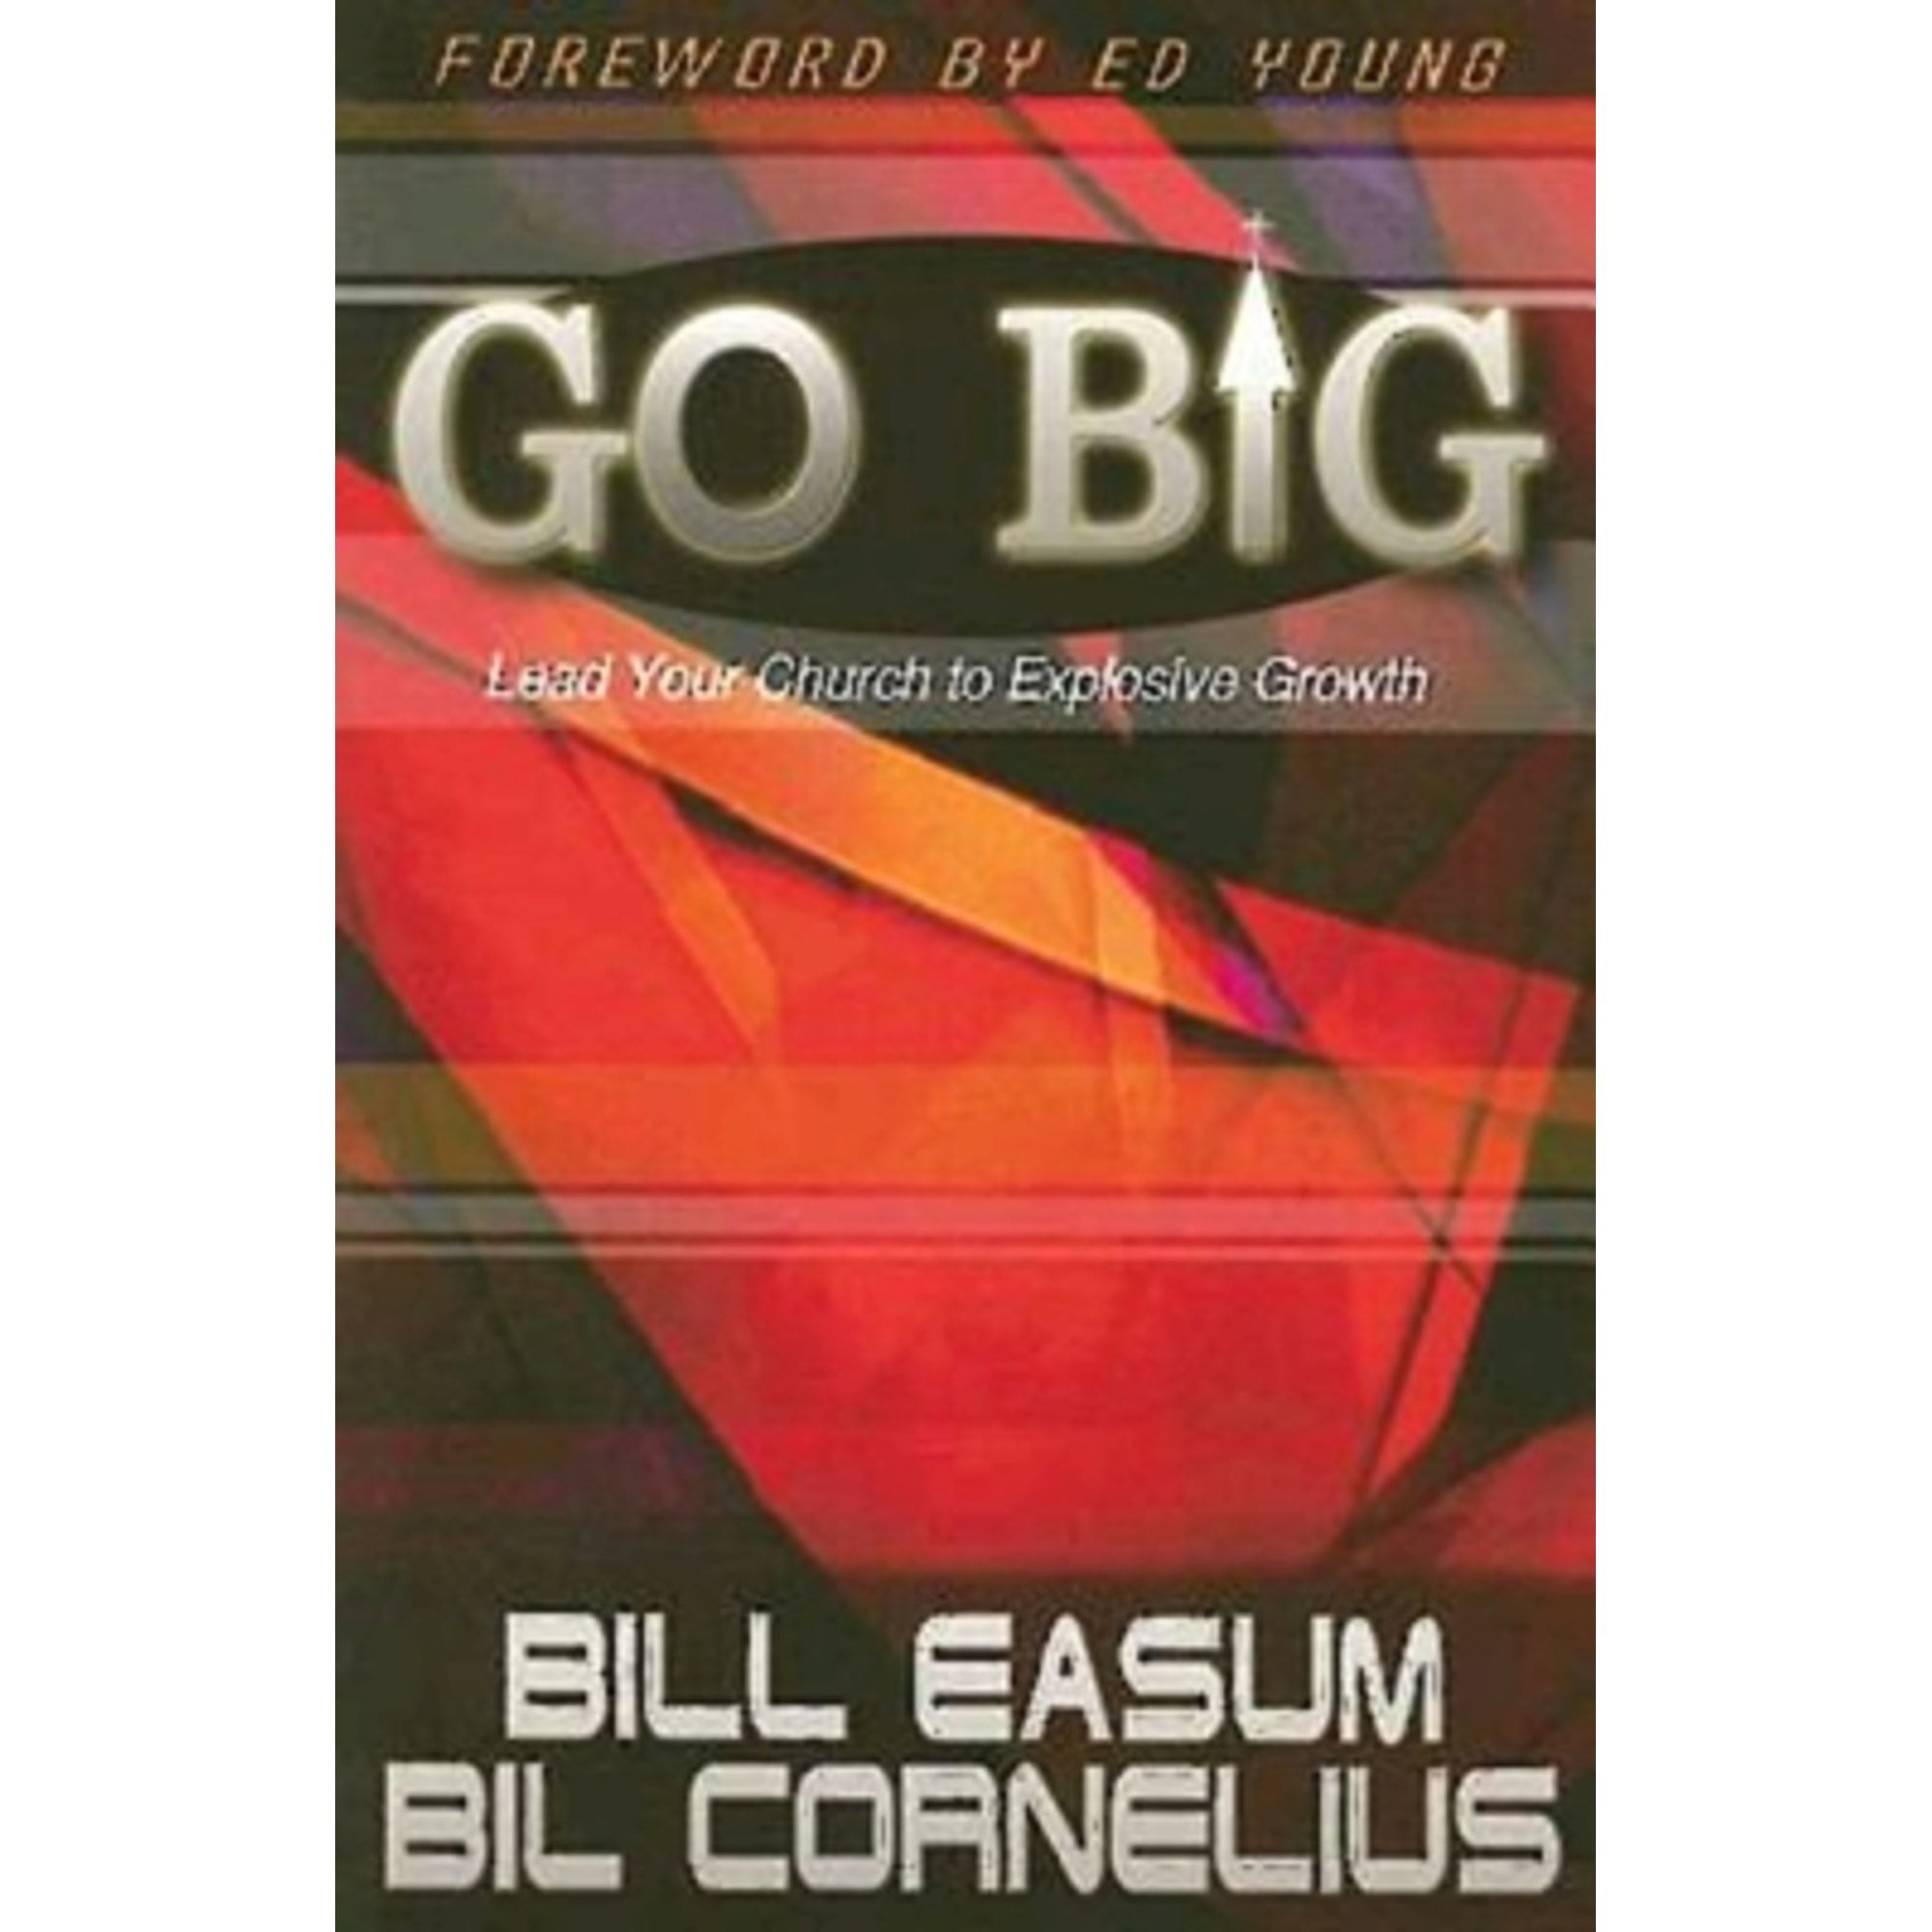 Pre-Owned Go Big: Lead Your Church to Explosive Growth (Paperback) by Bil Cornelius, Bill Easum